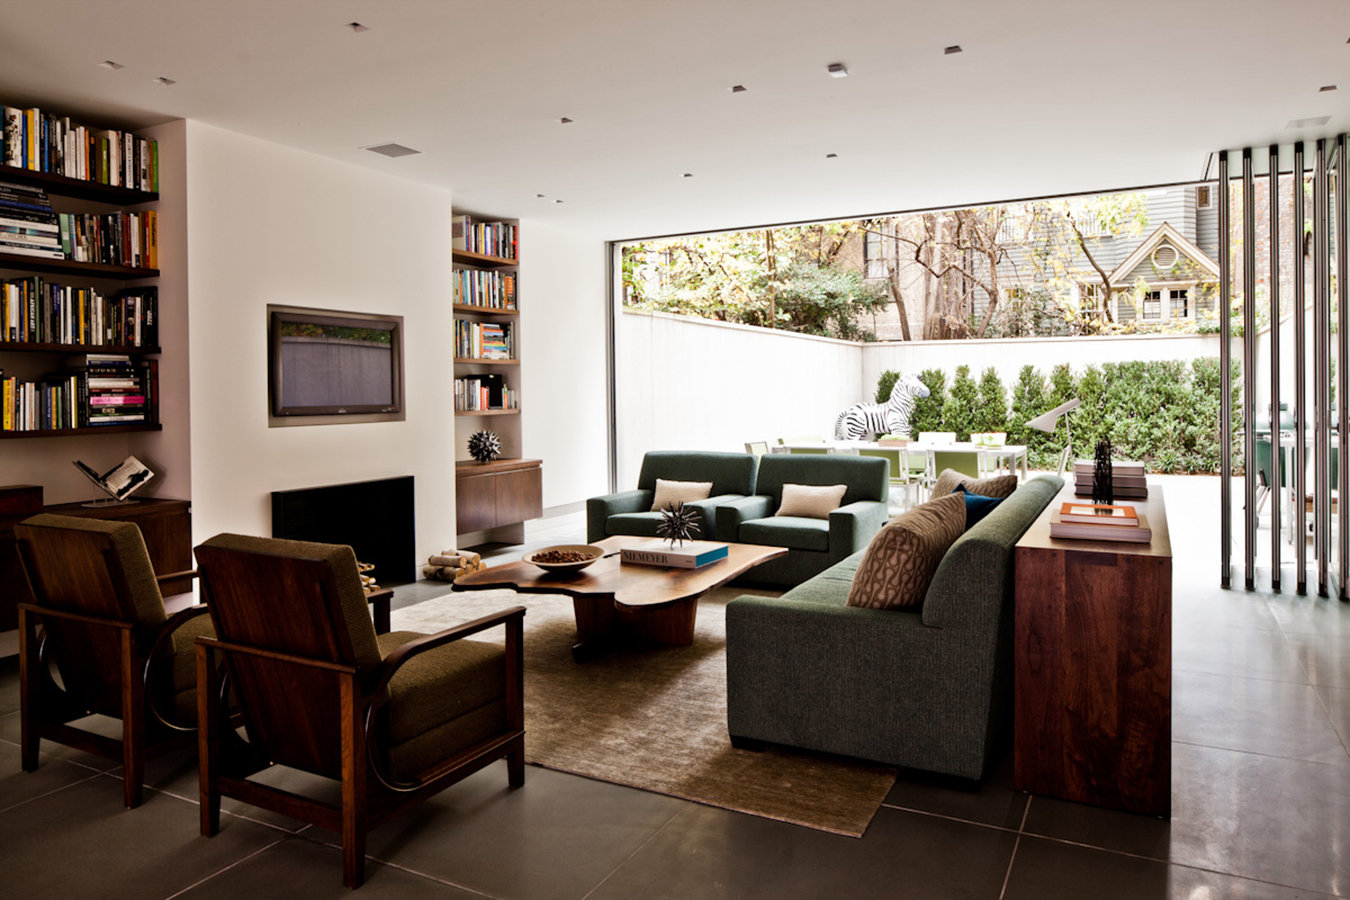 Modern living room with fireplace, bookshelves, upholstered chairs and sofa, and open back wall leading to outdoor patio.